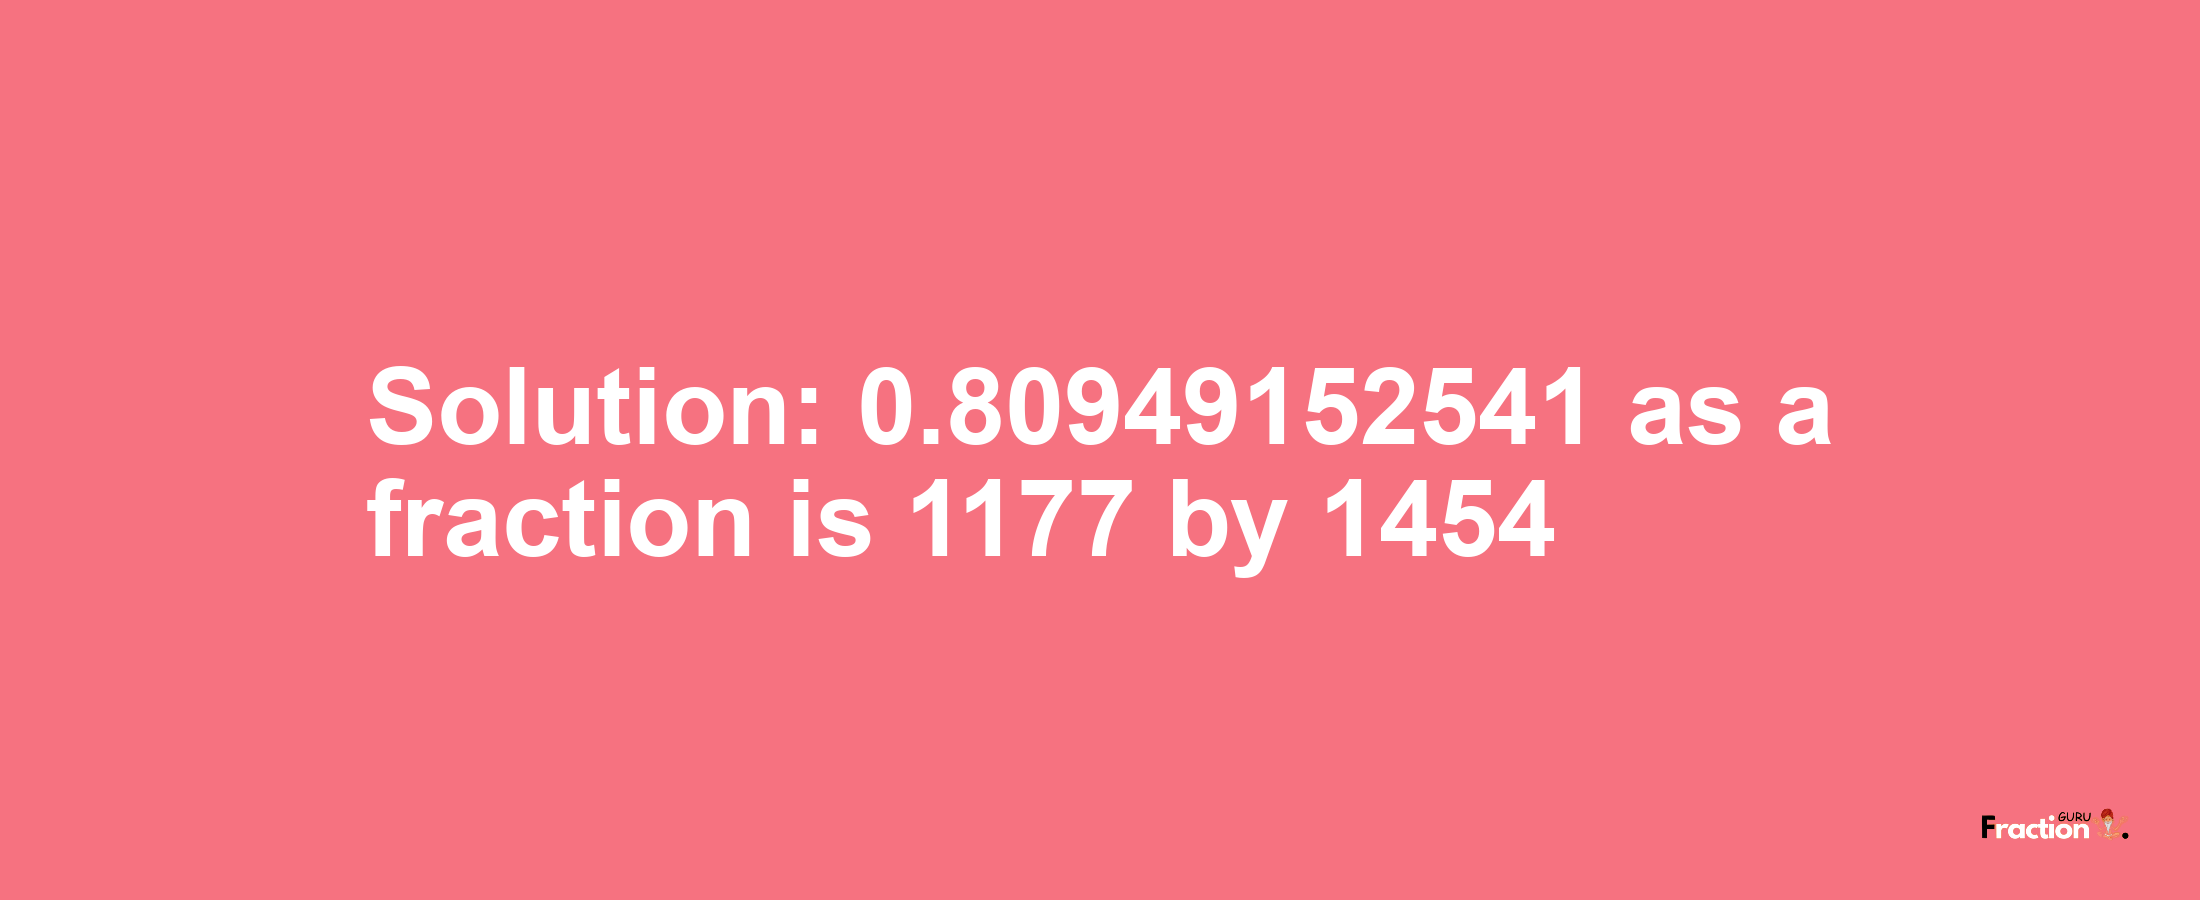 Solution:0.80949152541 as a fraction is 1177/1454